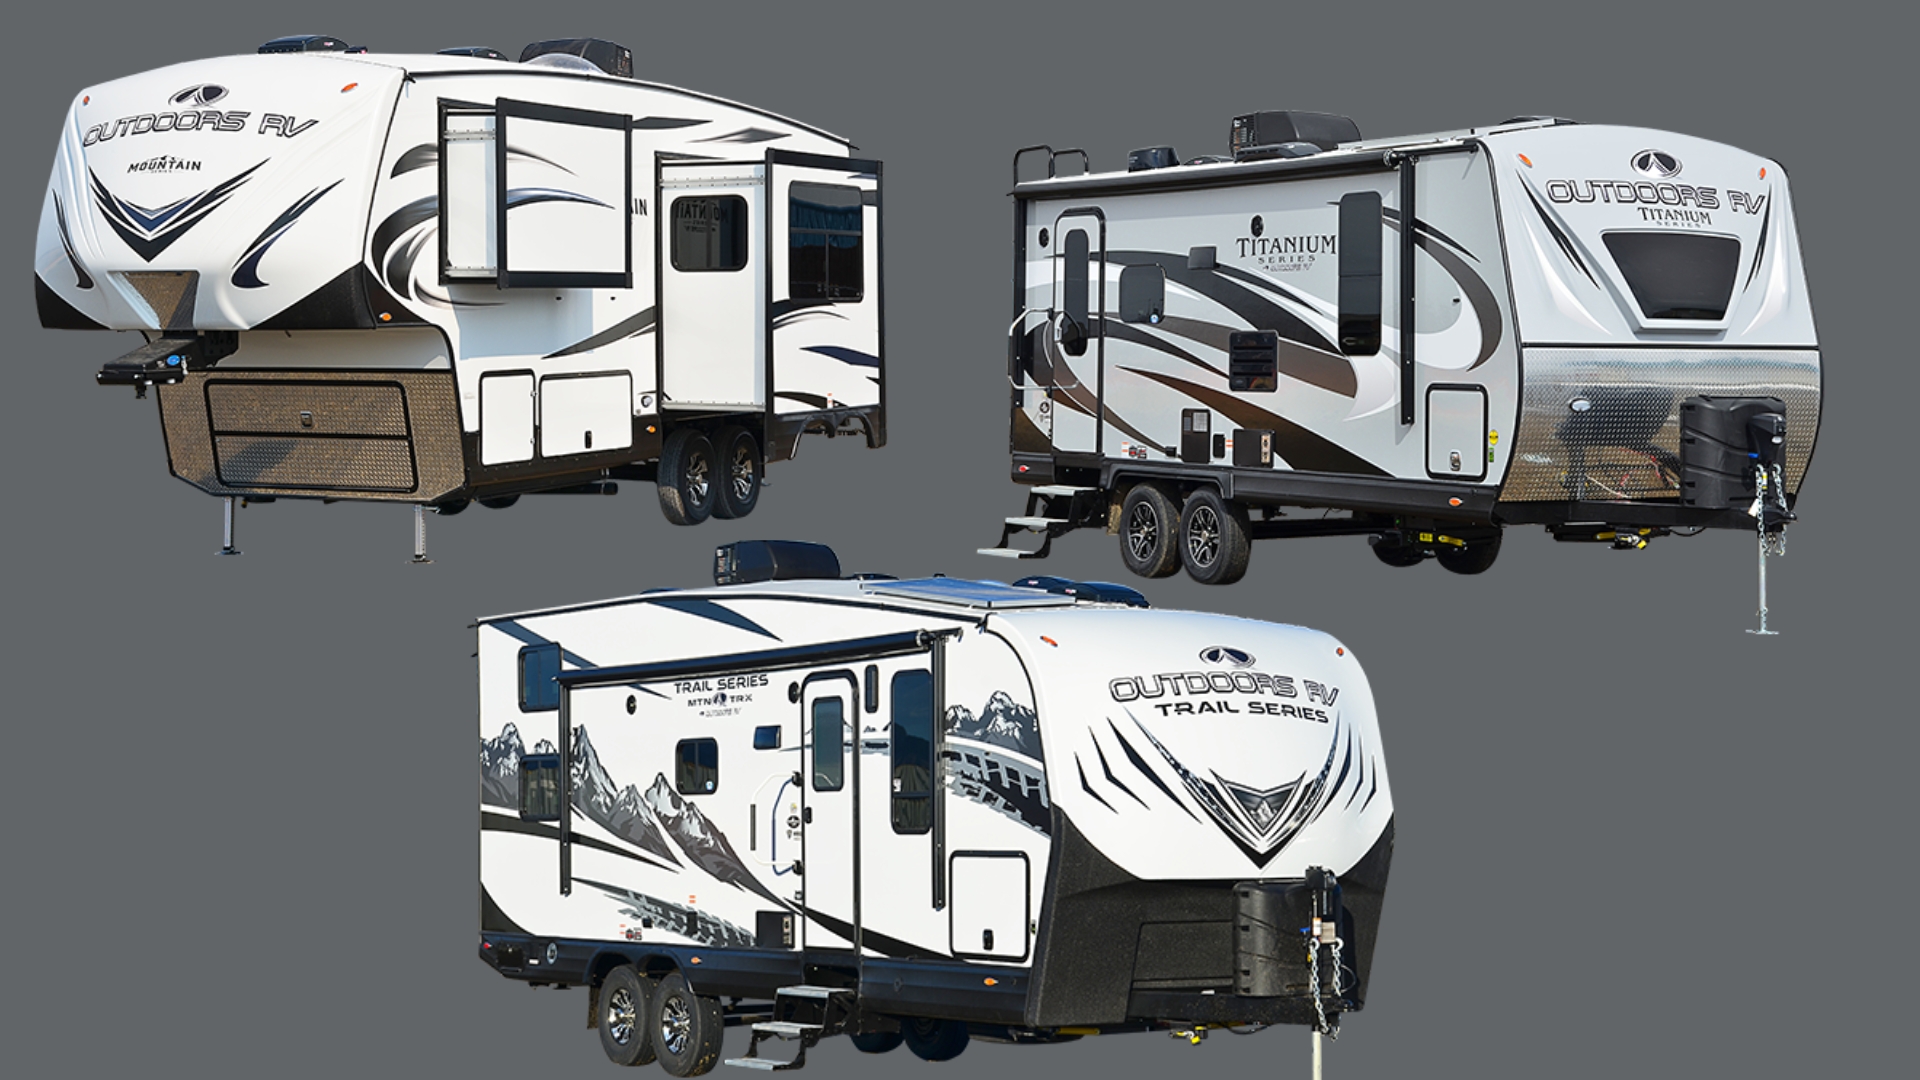 Outdoors Rv Makes Seriously Rugged Four